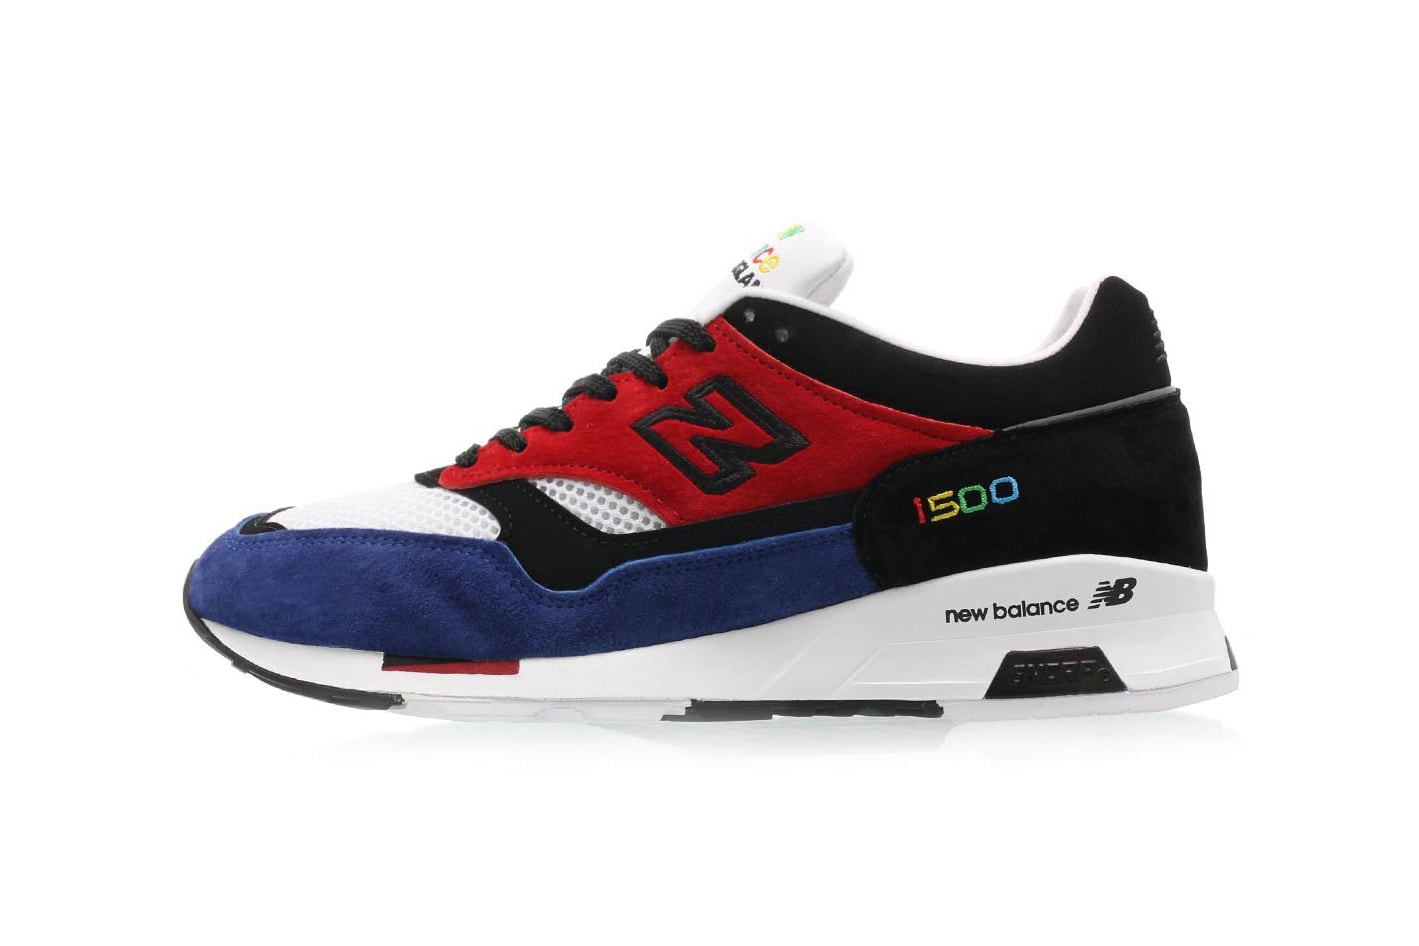 new balance 1500 made in england colorway release footwear shoes sneakers drops